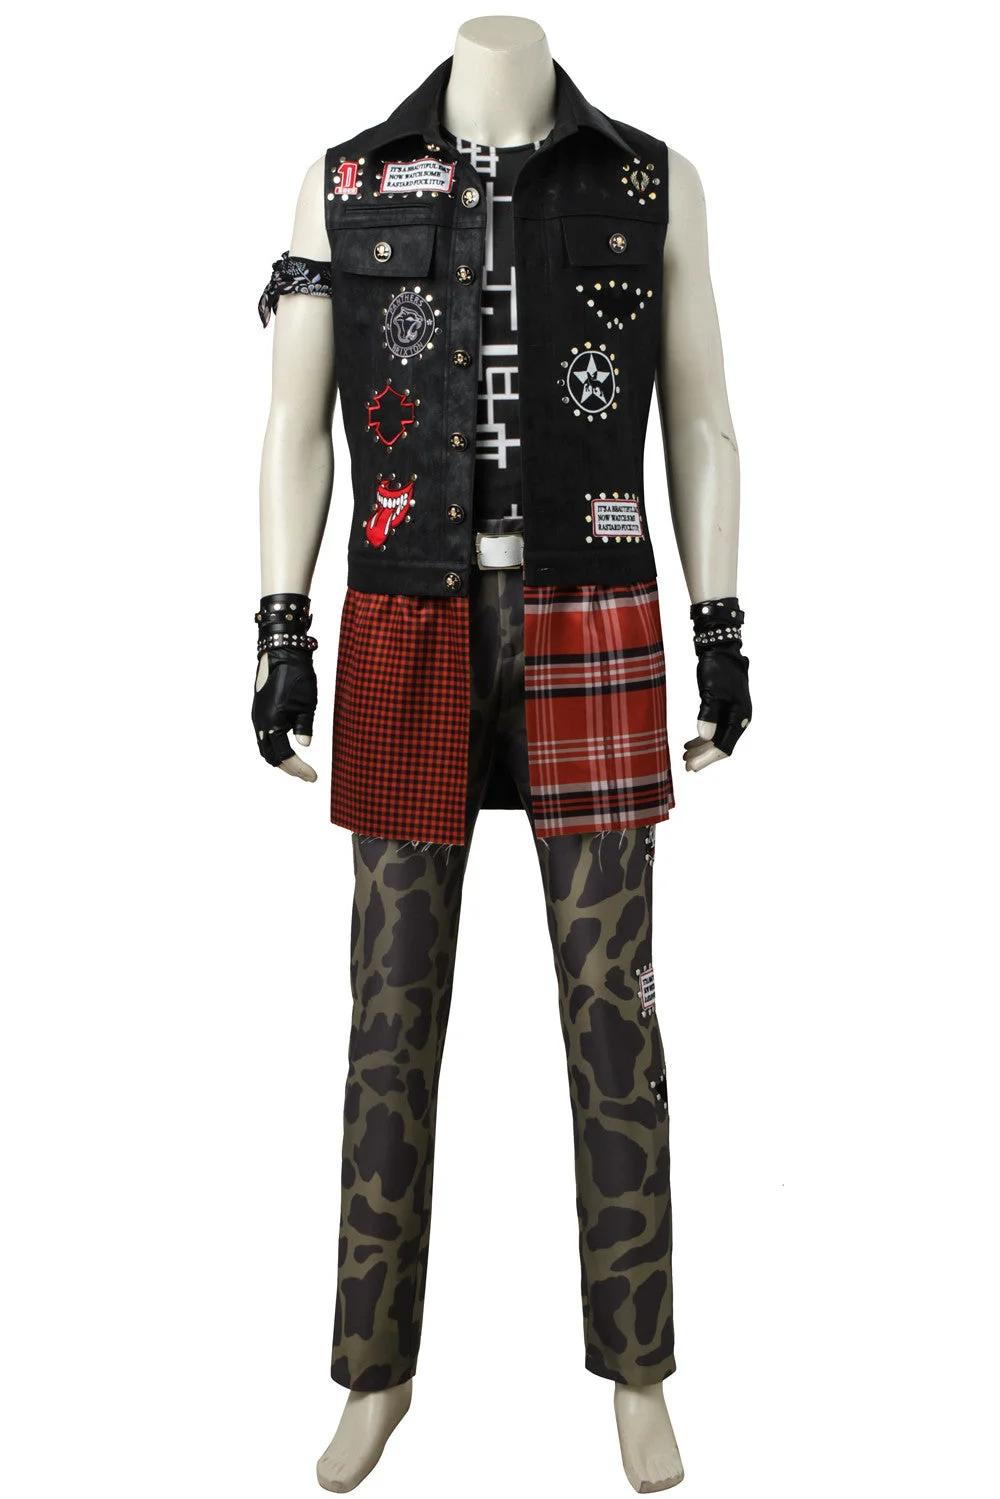 Final Fantasy XV Prompto Argentum Cosplay Outfit Costume